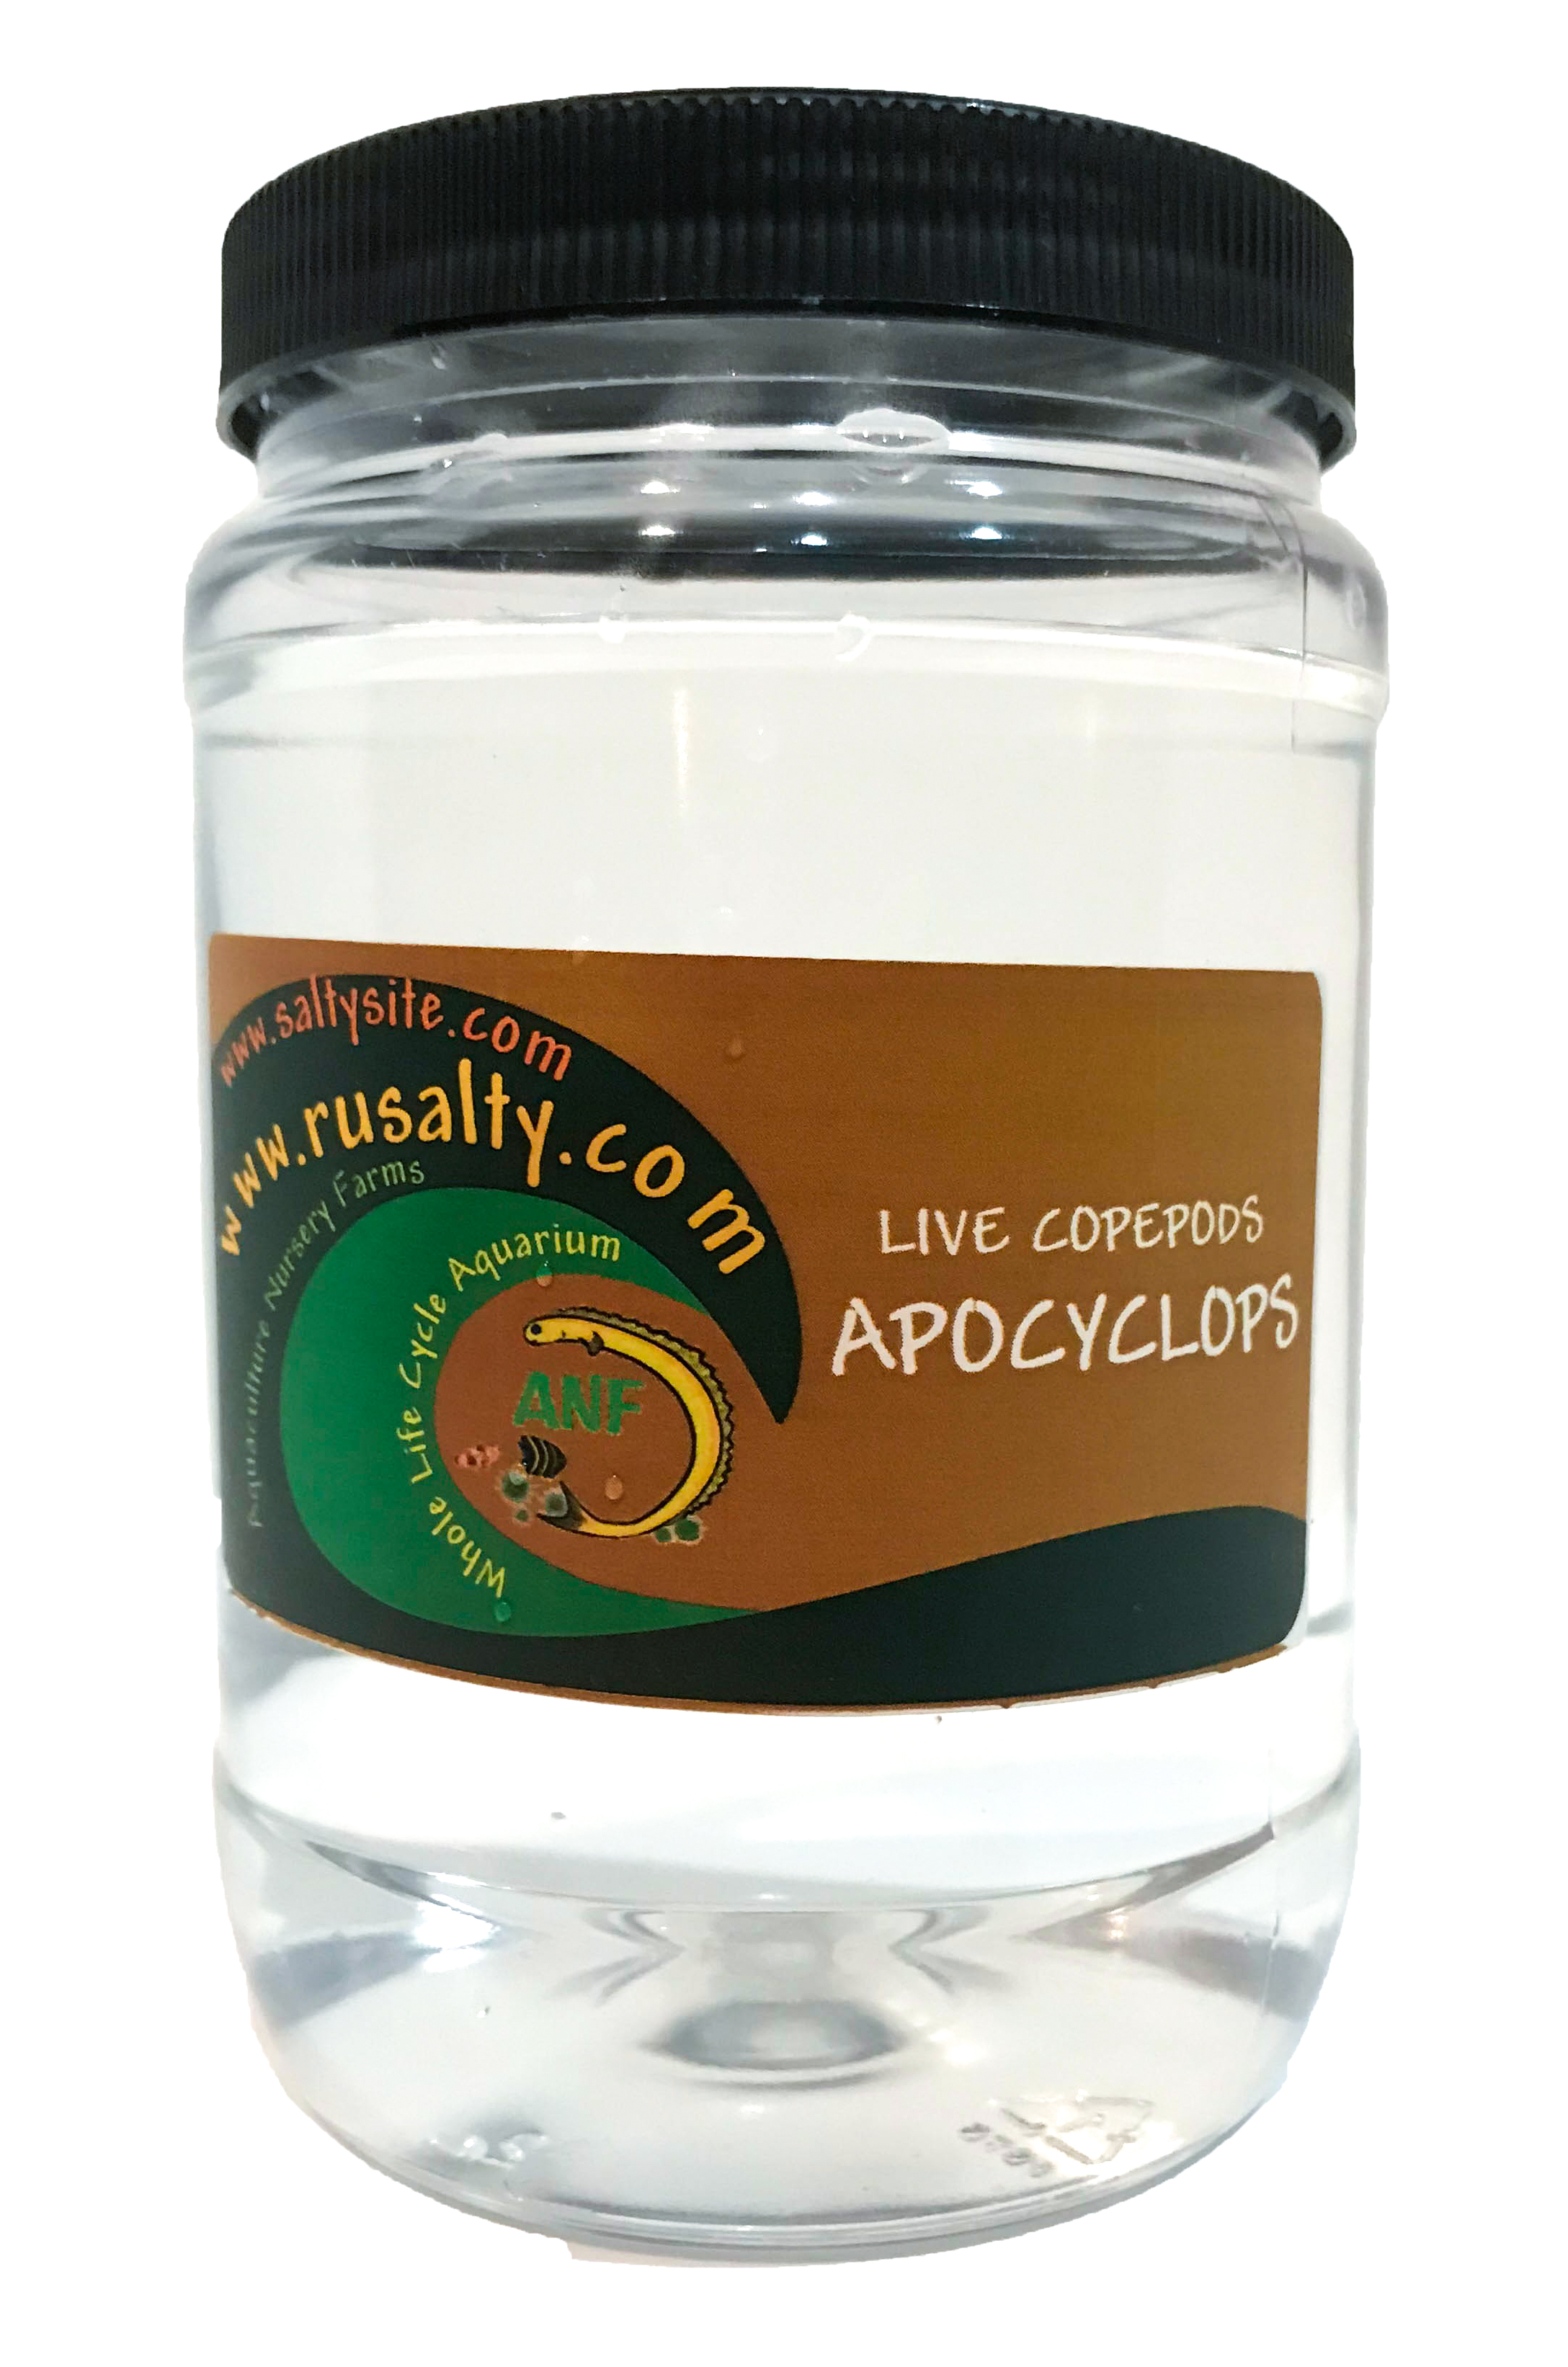 apocyclops-copepods.-live-ape-pods-ofr-sale-with-free-shipping.-aquarium-live-food.jpg